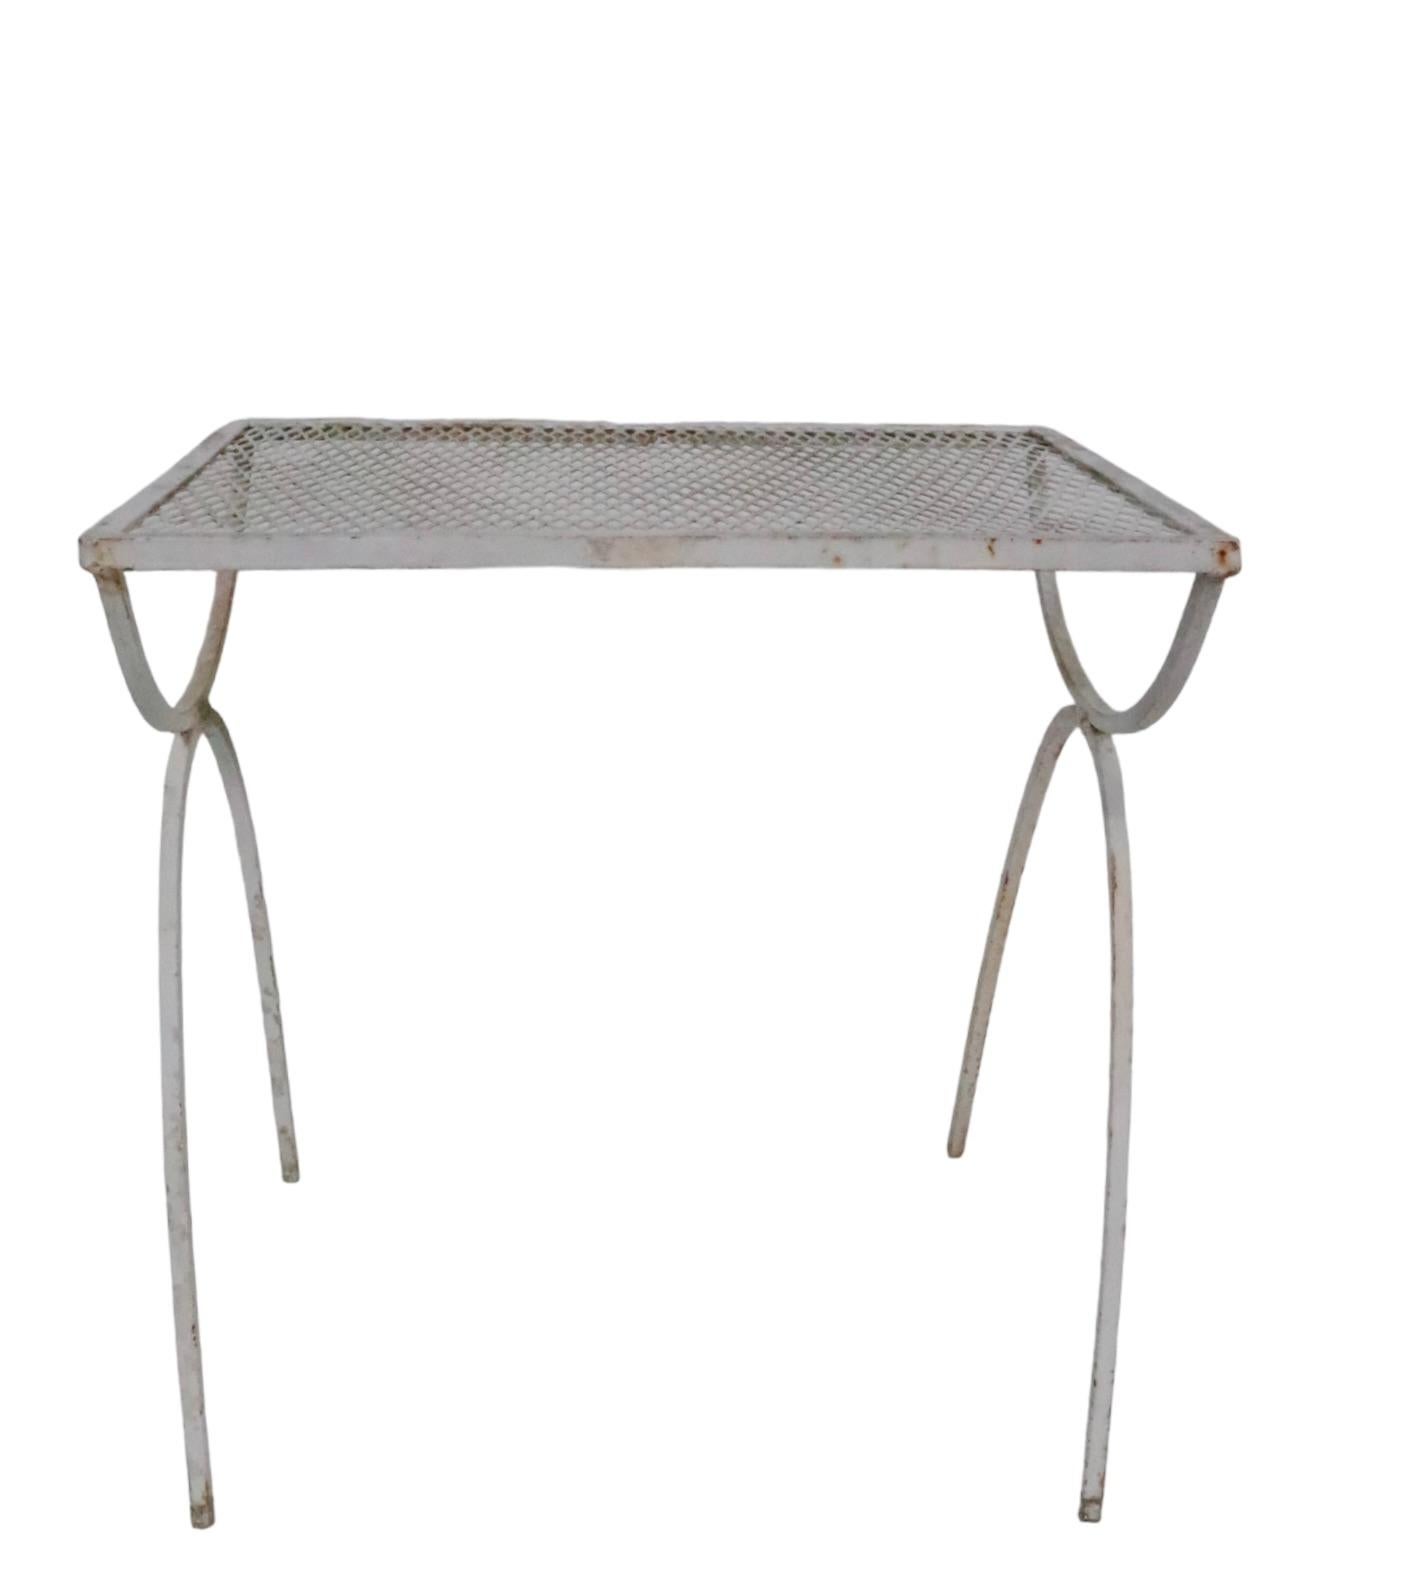 Vintage Wrought Iron Garden Poolside Patio Table by Tempestini for Salterini  For Sale 1